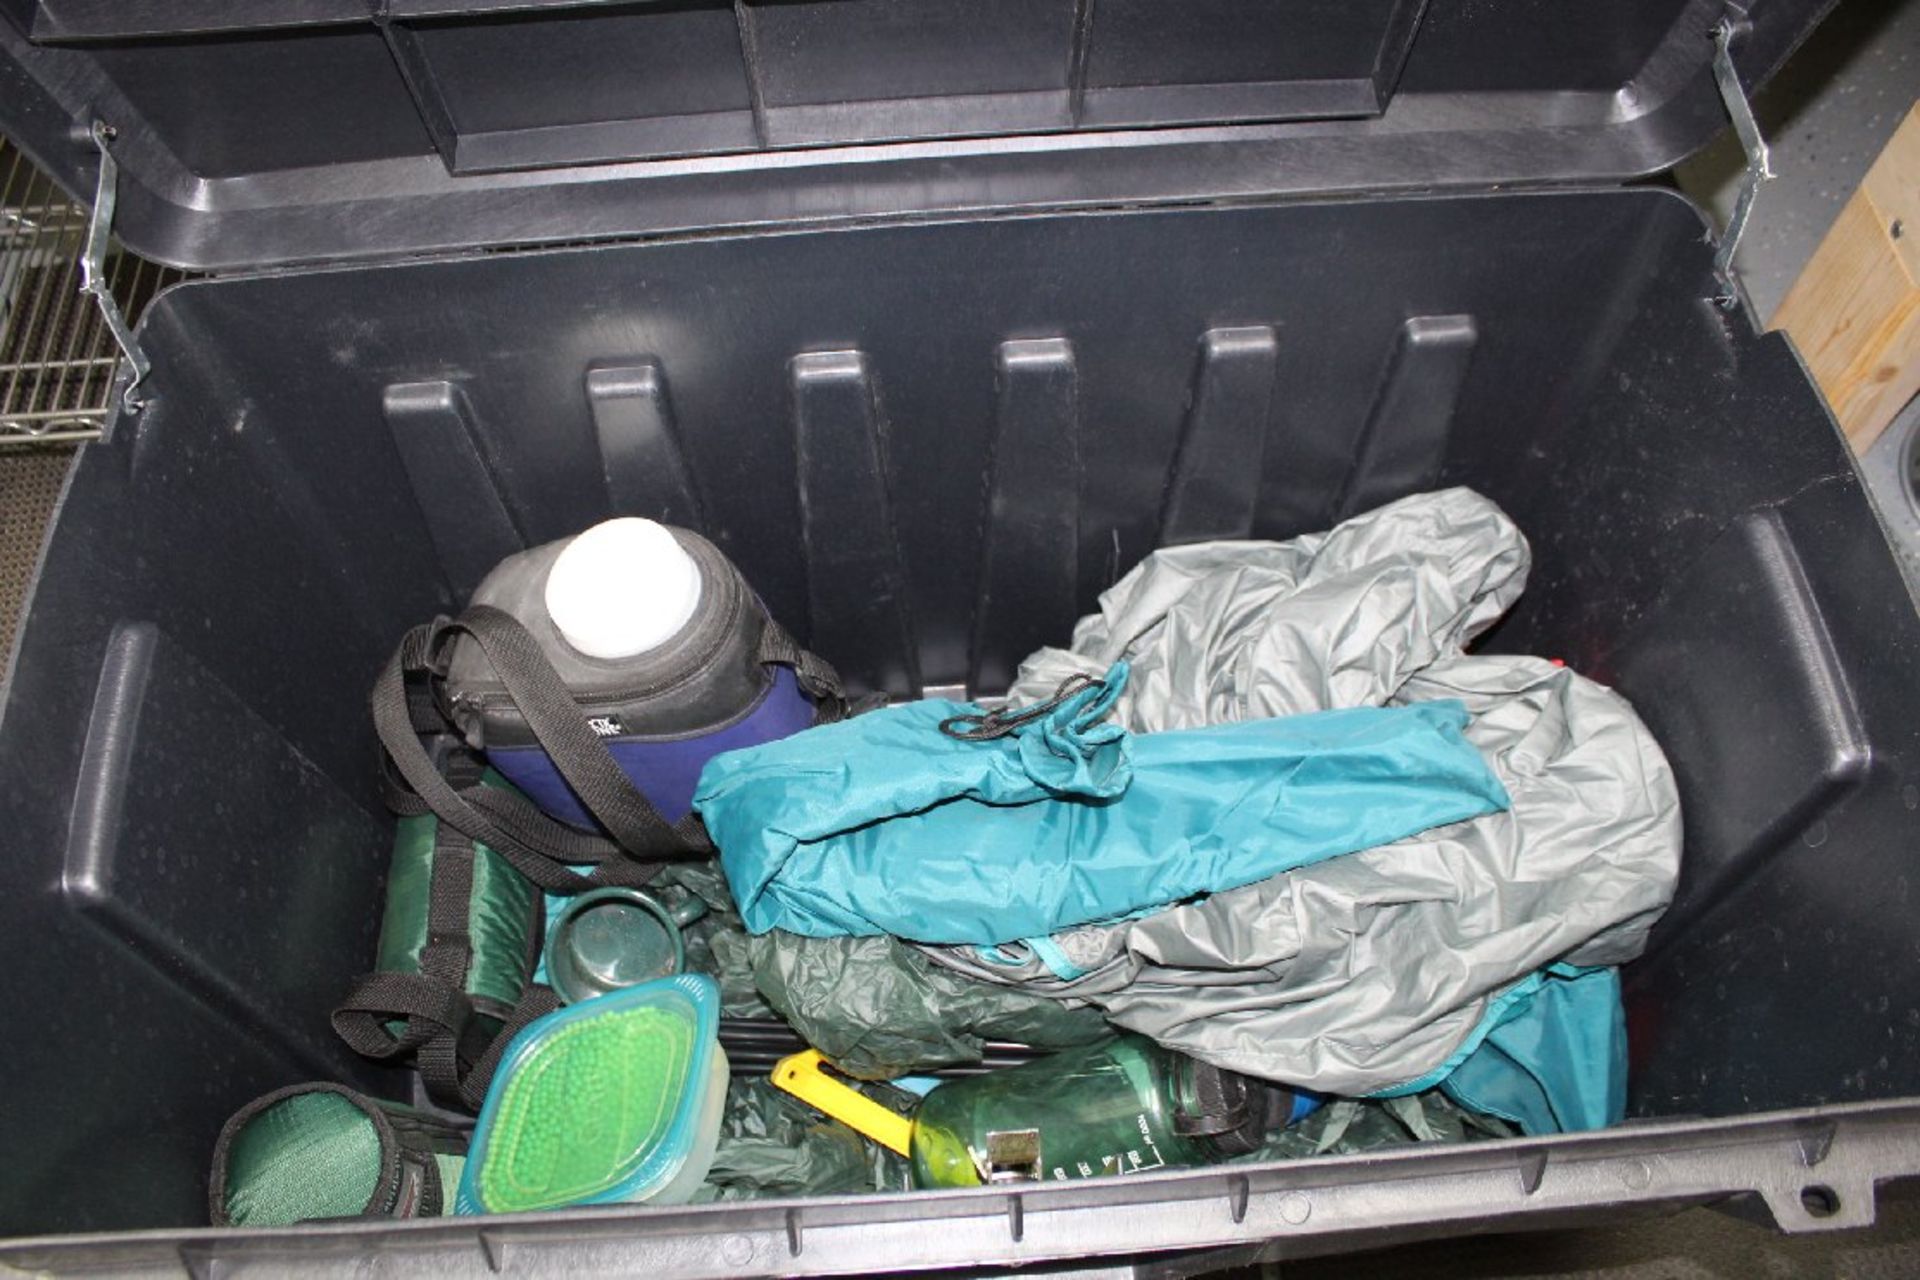 Contico Xtreme Tuff Plastic Locking Truck Box & Contents (miscellaneous camping gear, canteens,